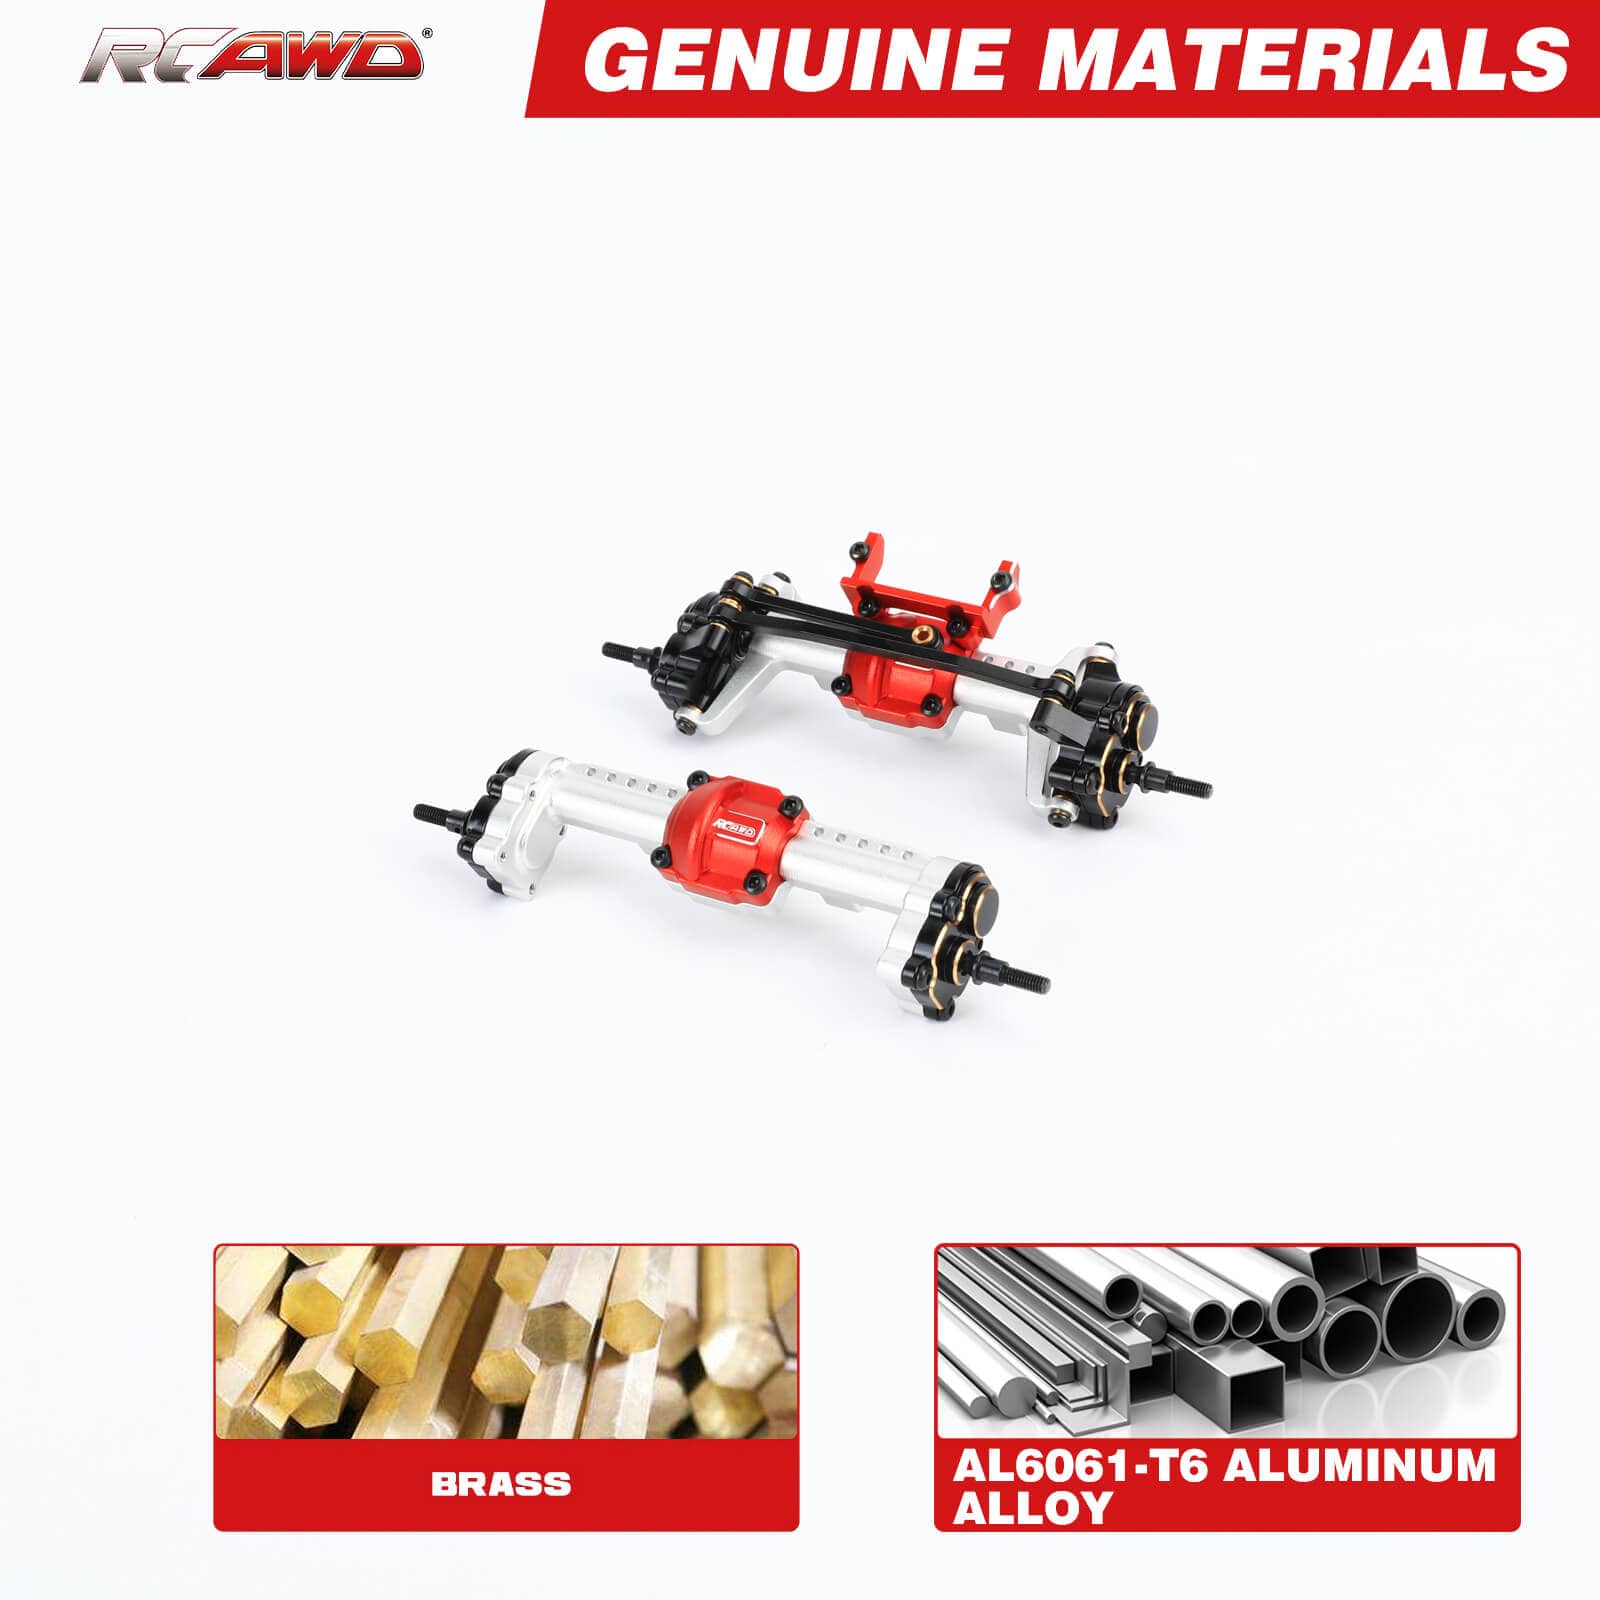 RCAWD FMS FCX24 RCAWD Differential Portal Axles Complete Set for FMS 1/24 1/18 D6-C3112